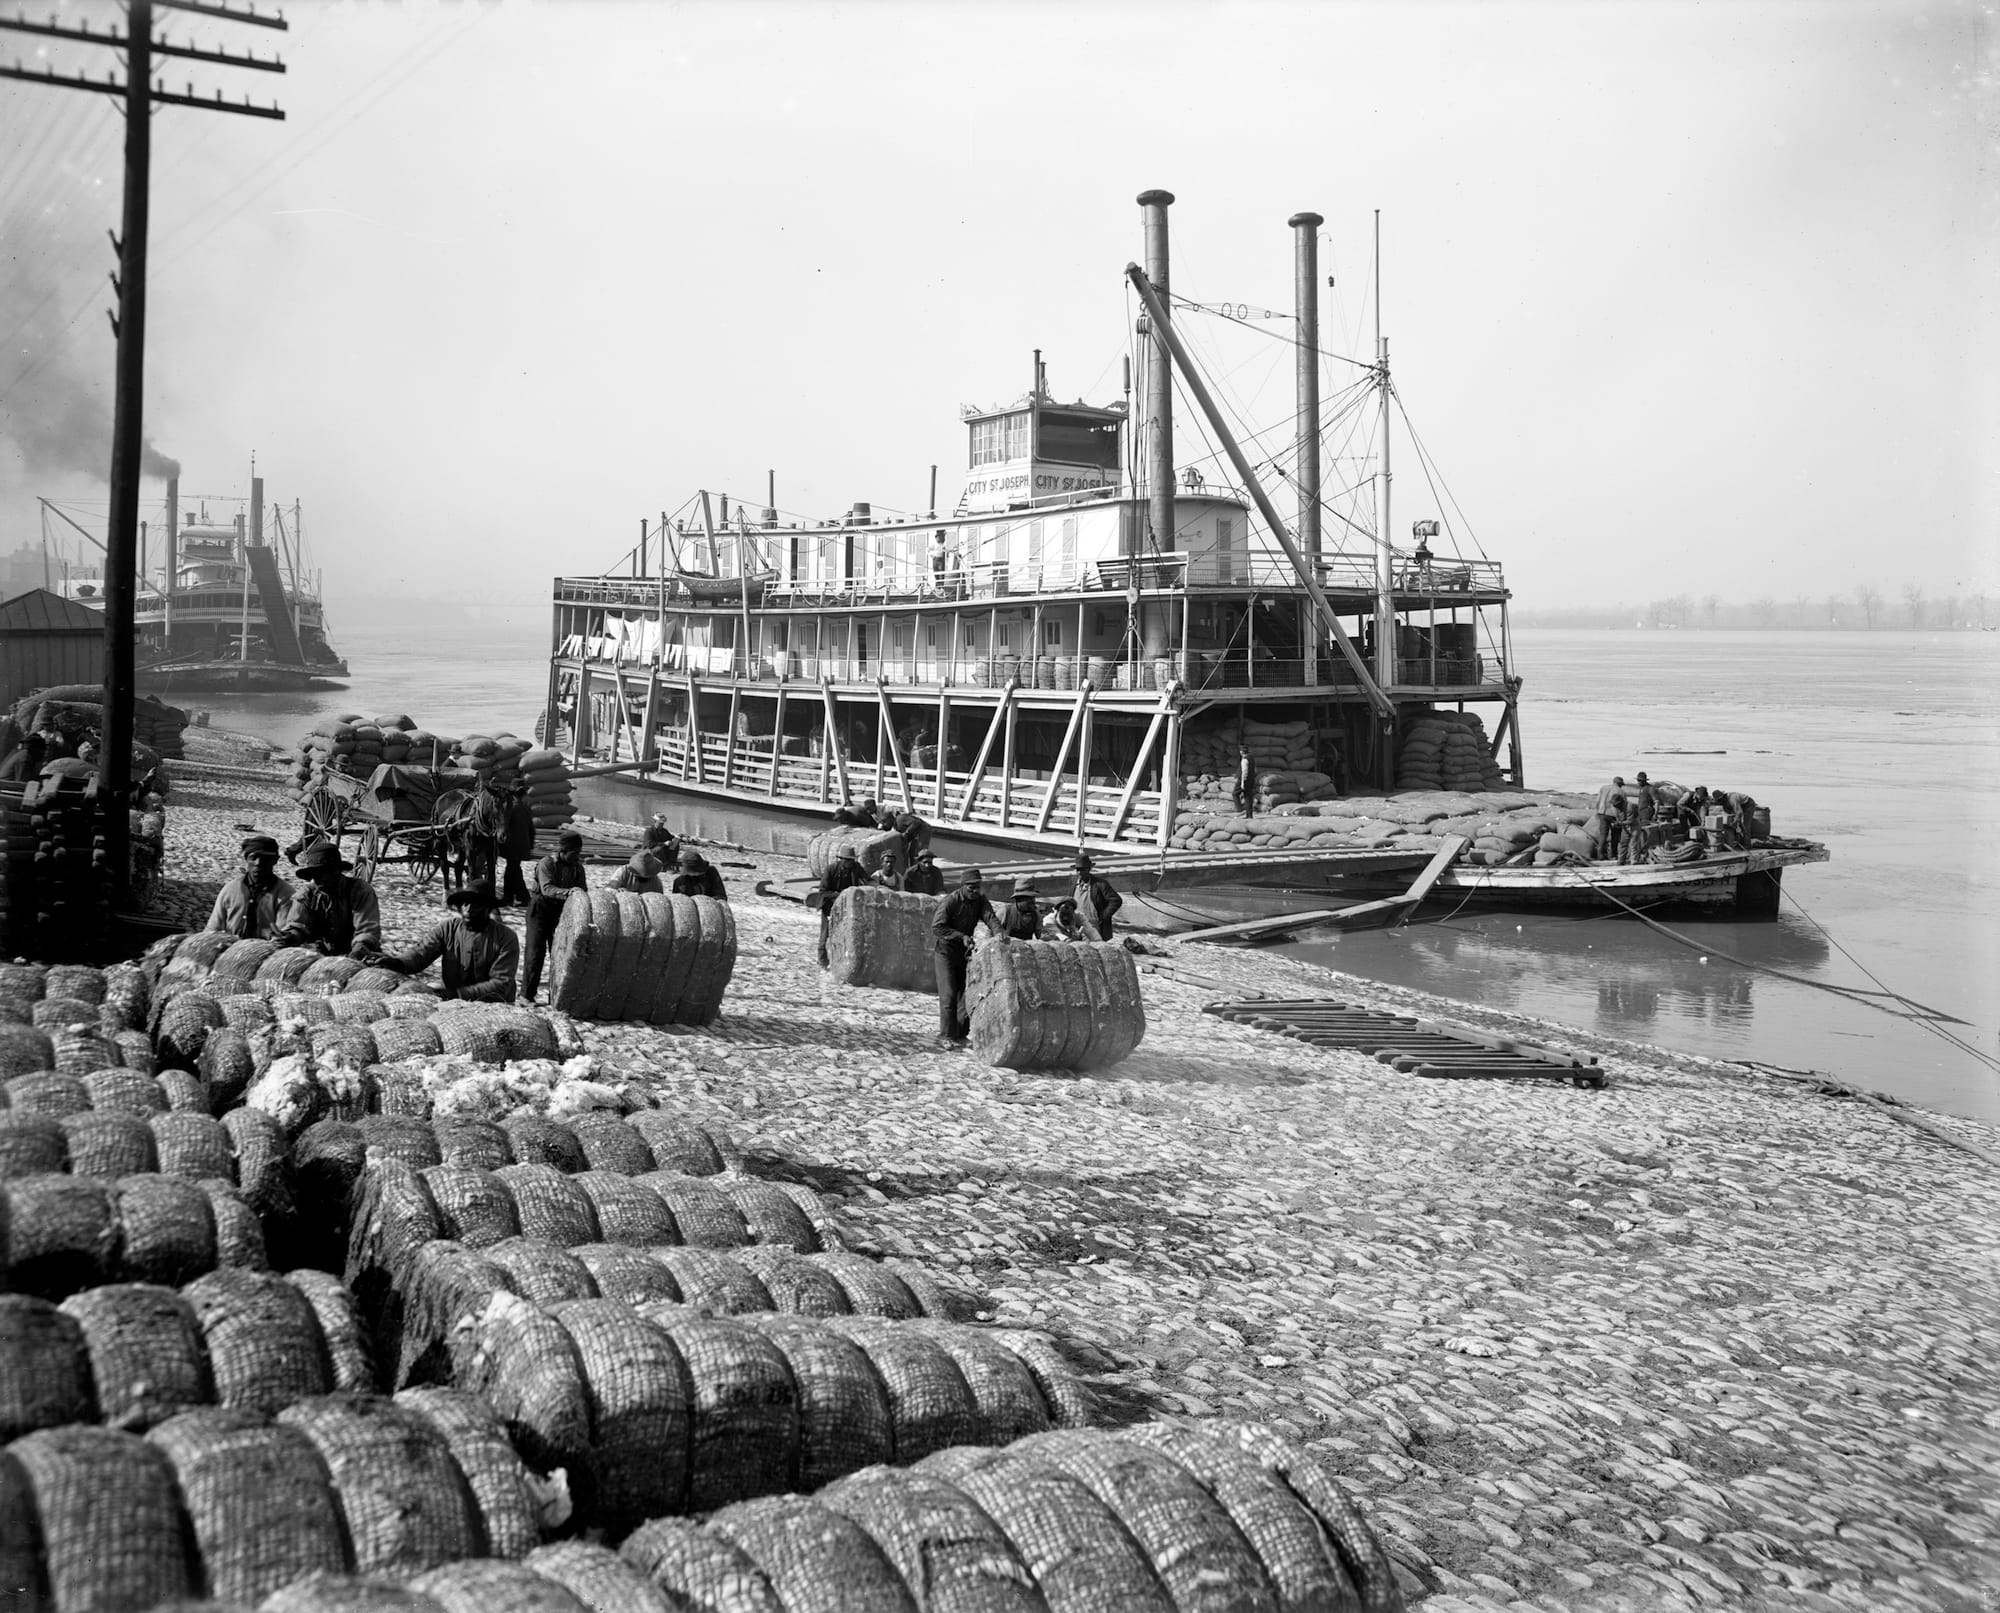 Originally completed in 1861, Memphis Landing was a critical piece of civic infrastructure. Accommodating the dramatic rise and fall of the Mississippi River, its simple paved slope was ideal for facilitating nineteenth-century commerce. Here workers are shown unloading cotton at the Landing, ca. 1900. Detroit Publishing Co., courtesy the Library of Congress